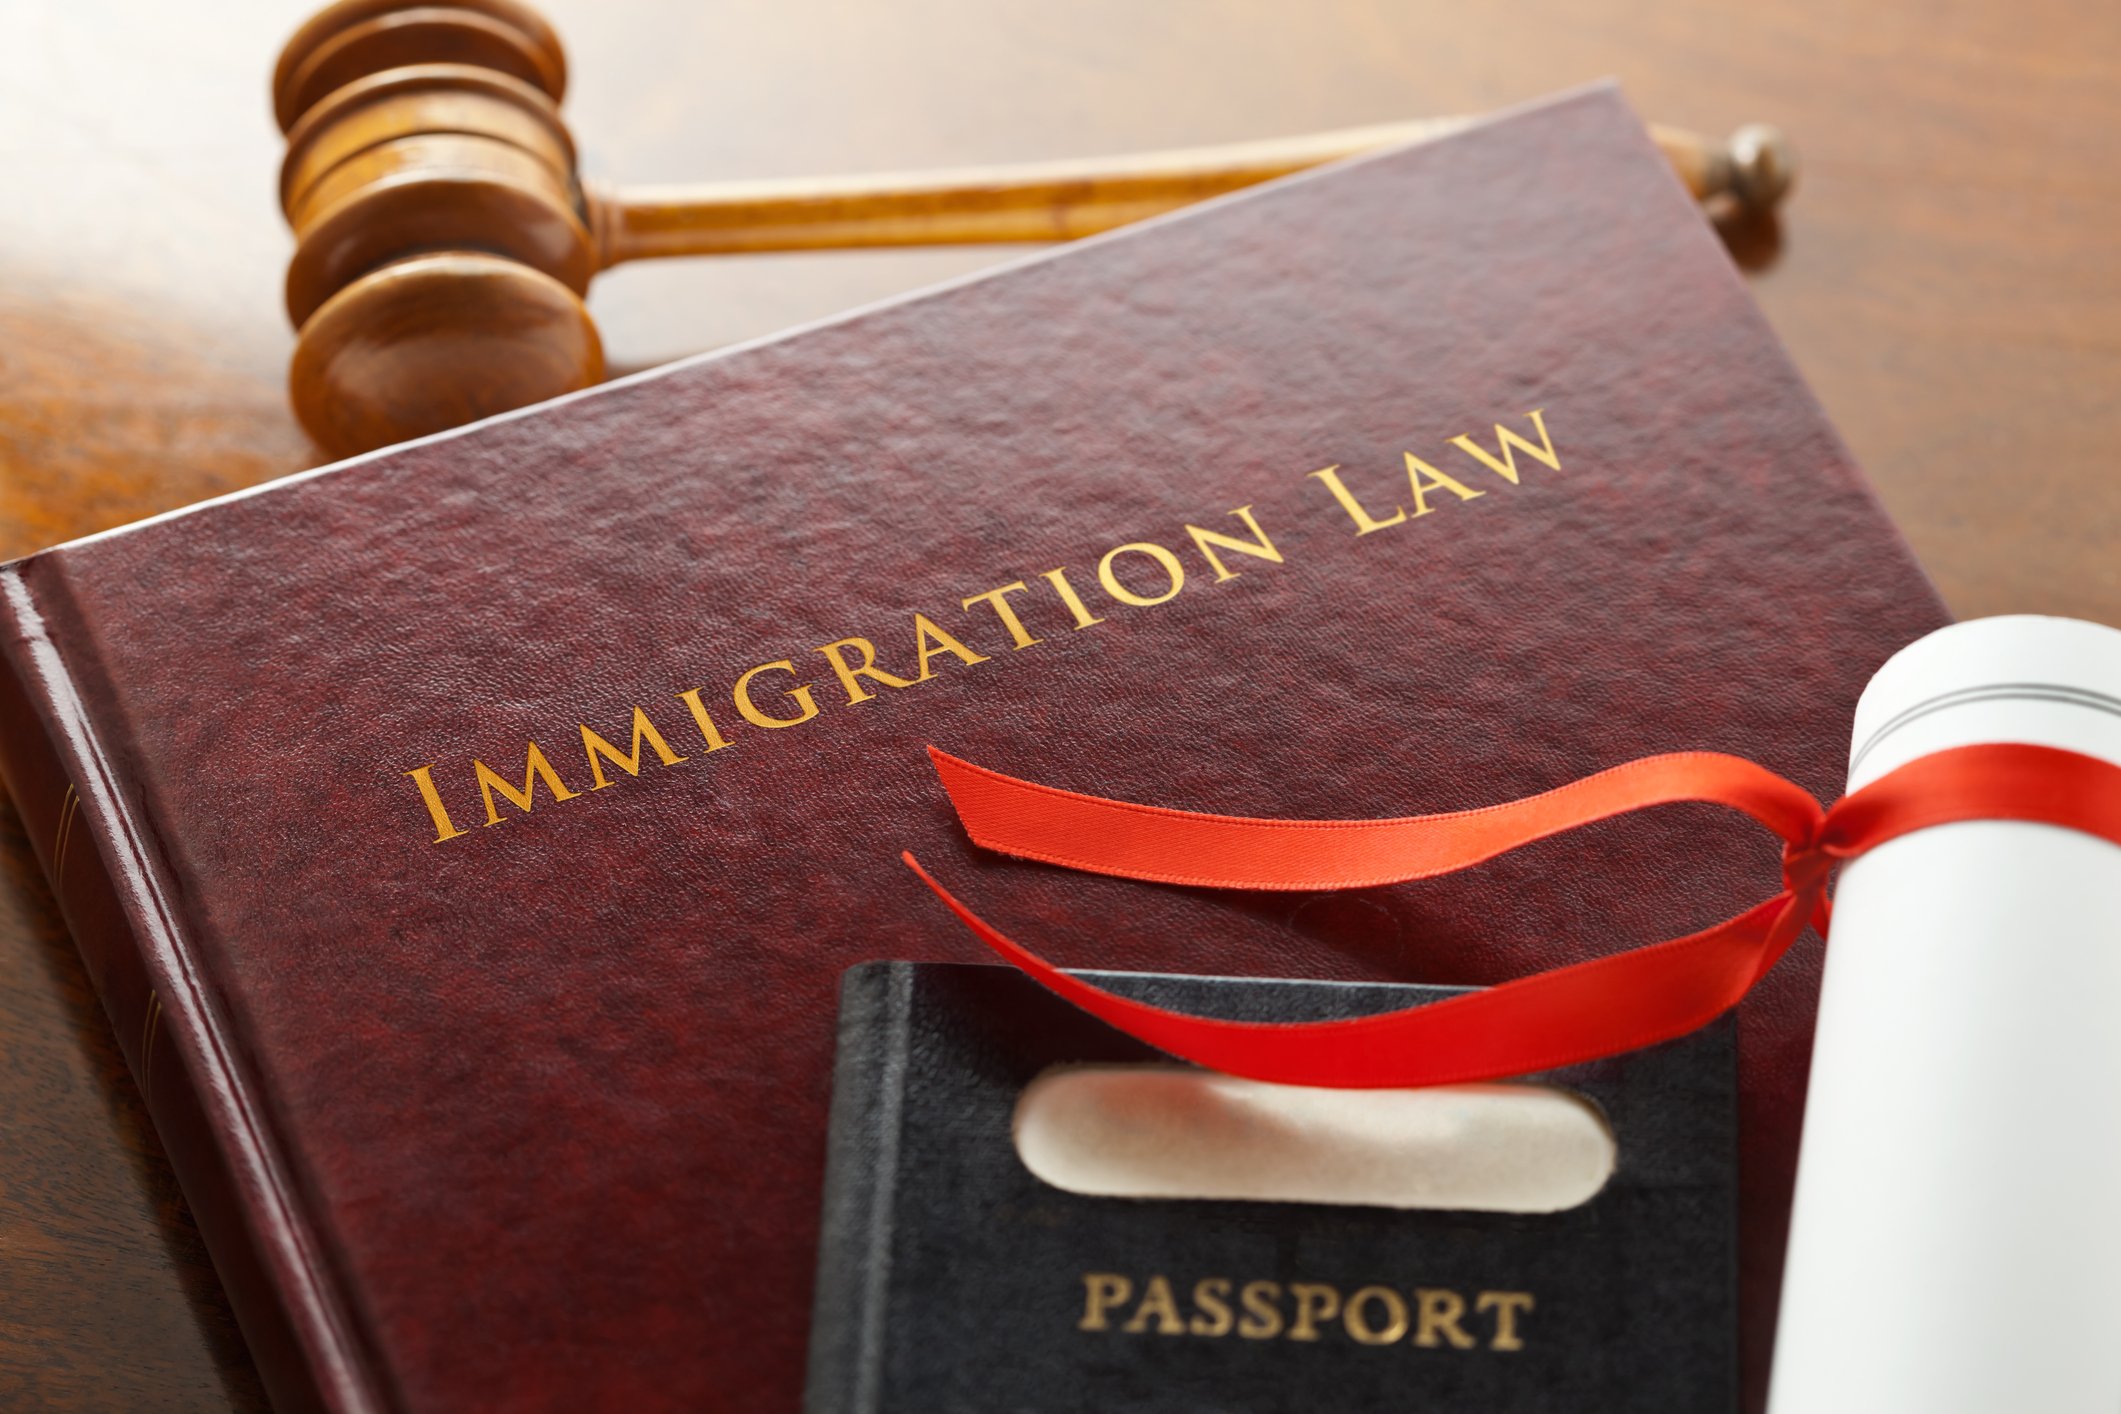 support of immigration lawyer